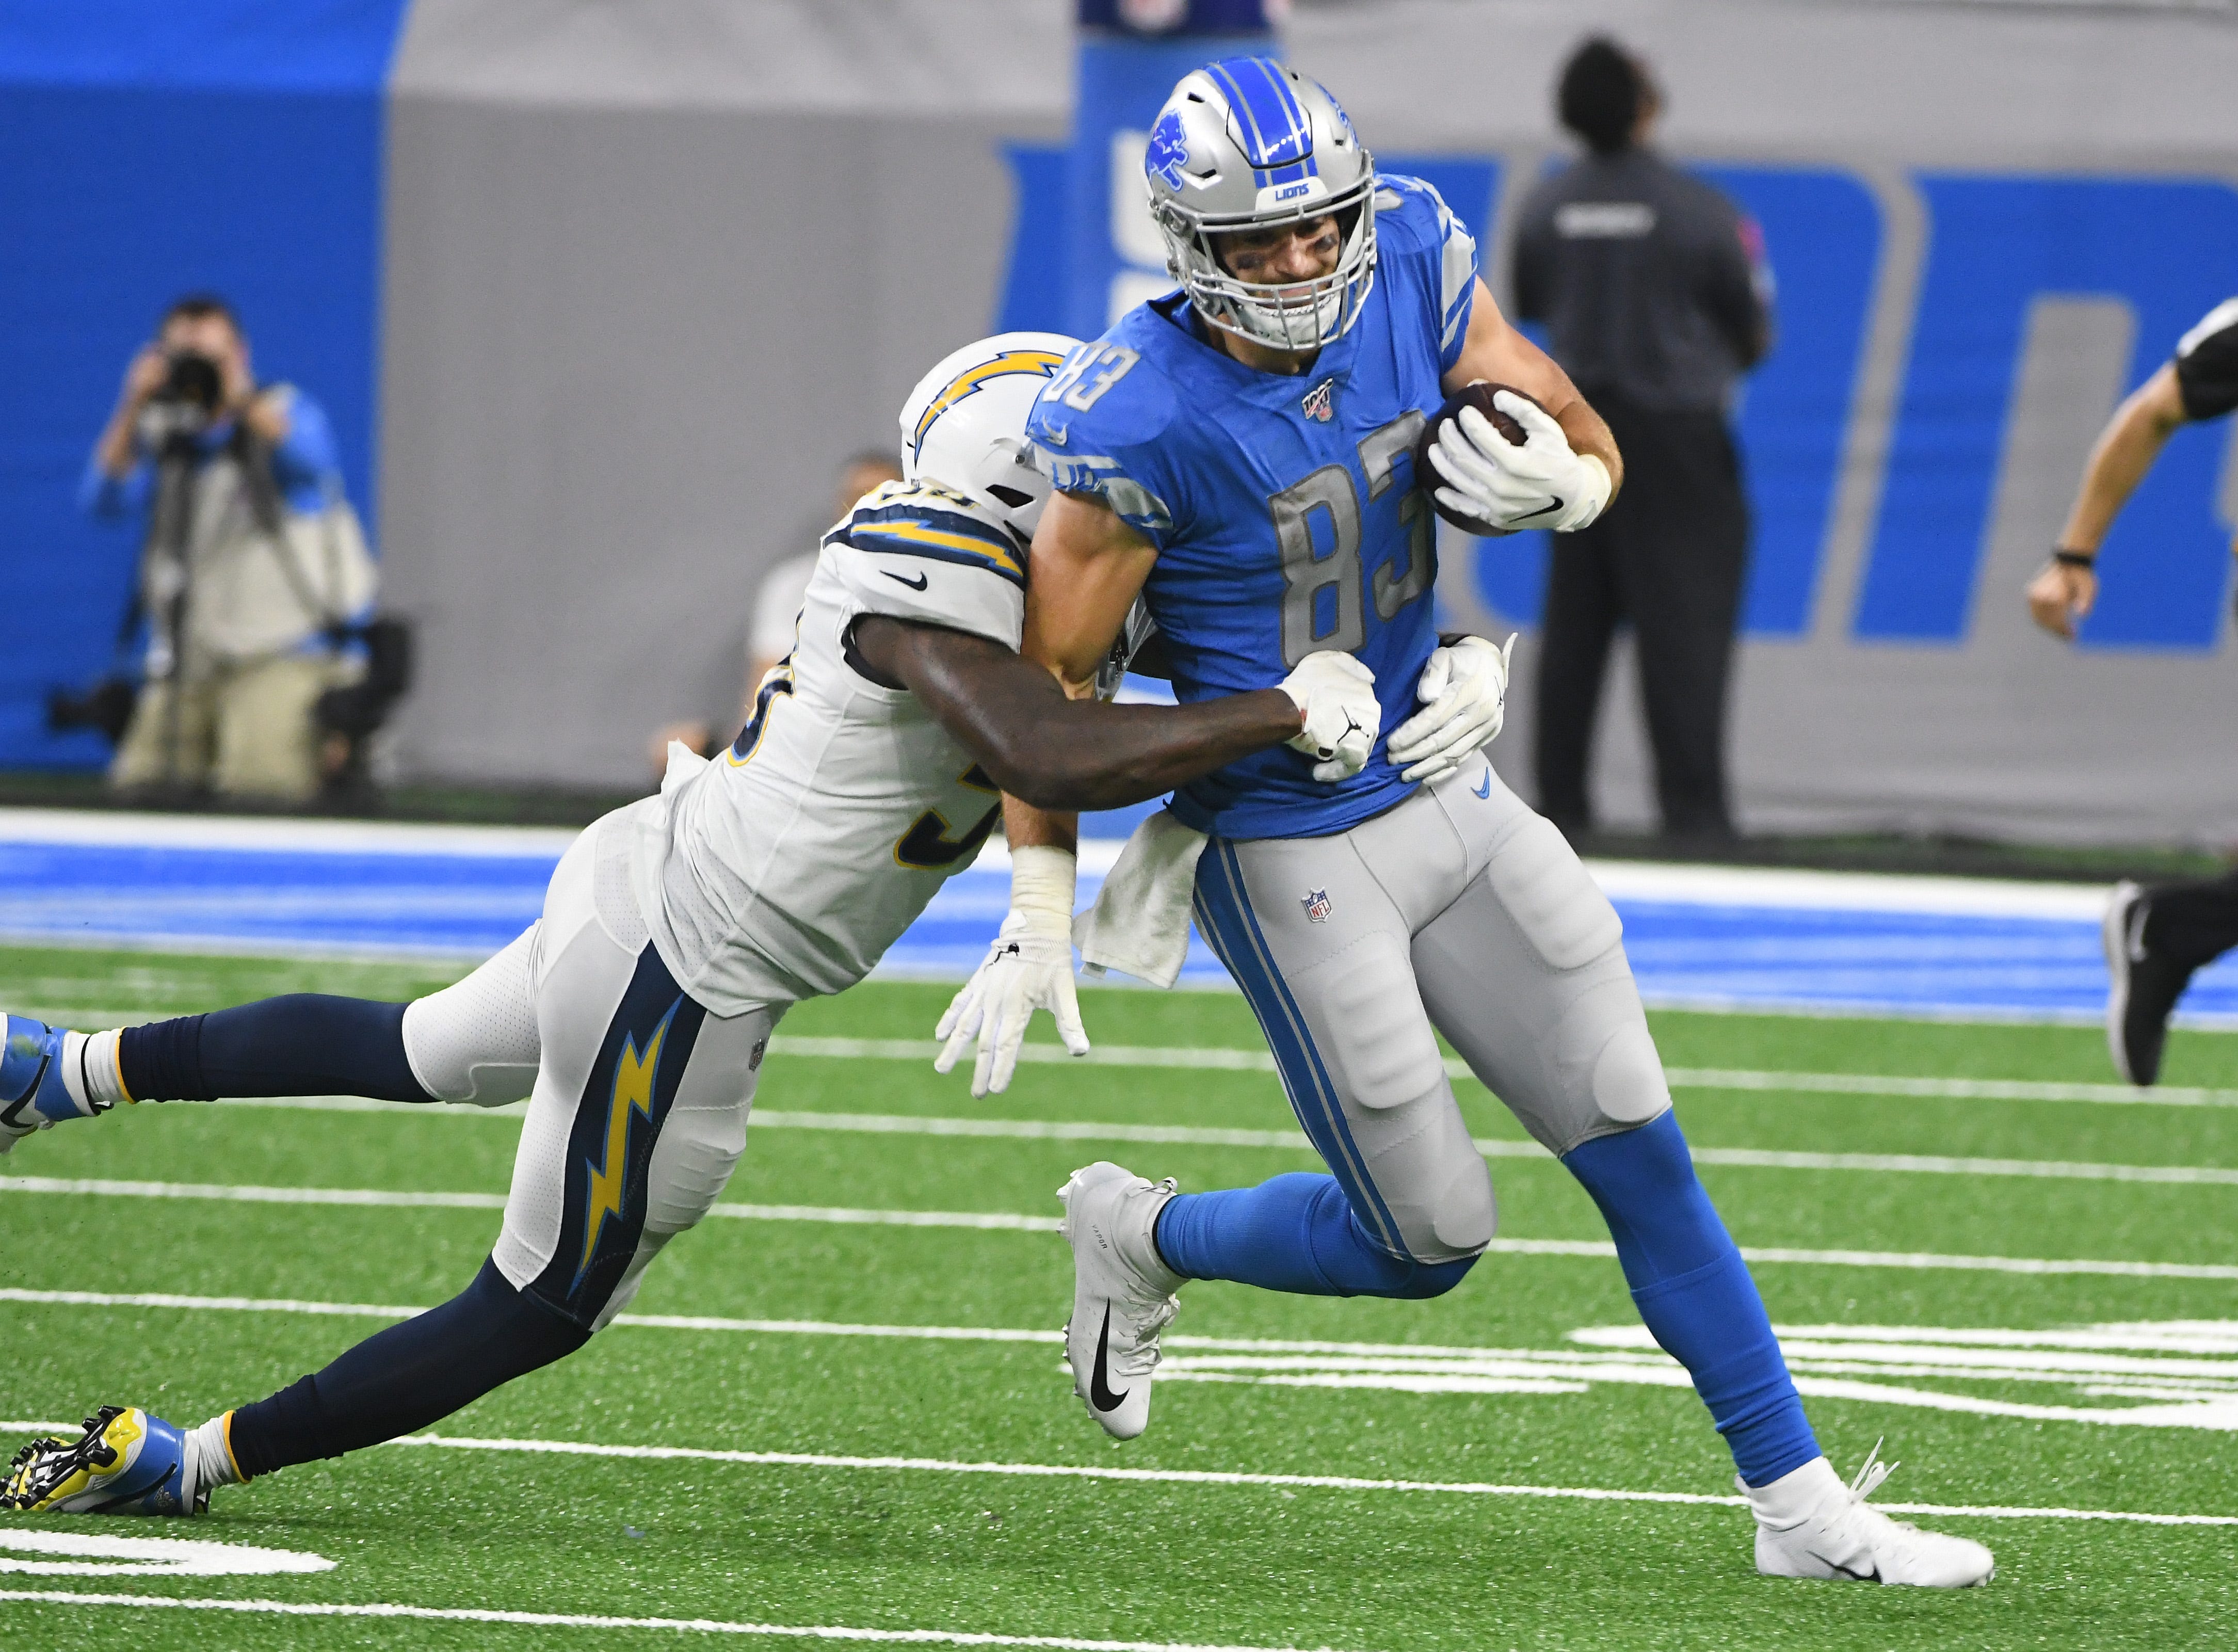 Jesse James, tight end: At no point did James show he was the guy the Lions prioritized signing in free agency. He had a dismal year as a pass-catcher, both before and after Hockenson’s injury, while serving as a below-average blocker, both in the ground game and in pass protection. Grade: F